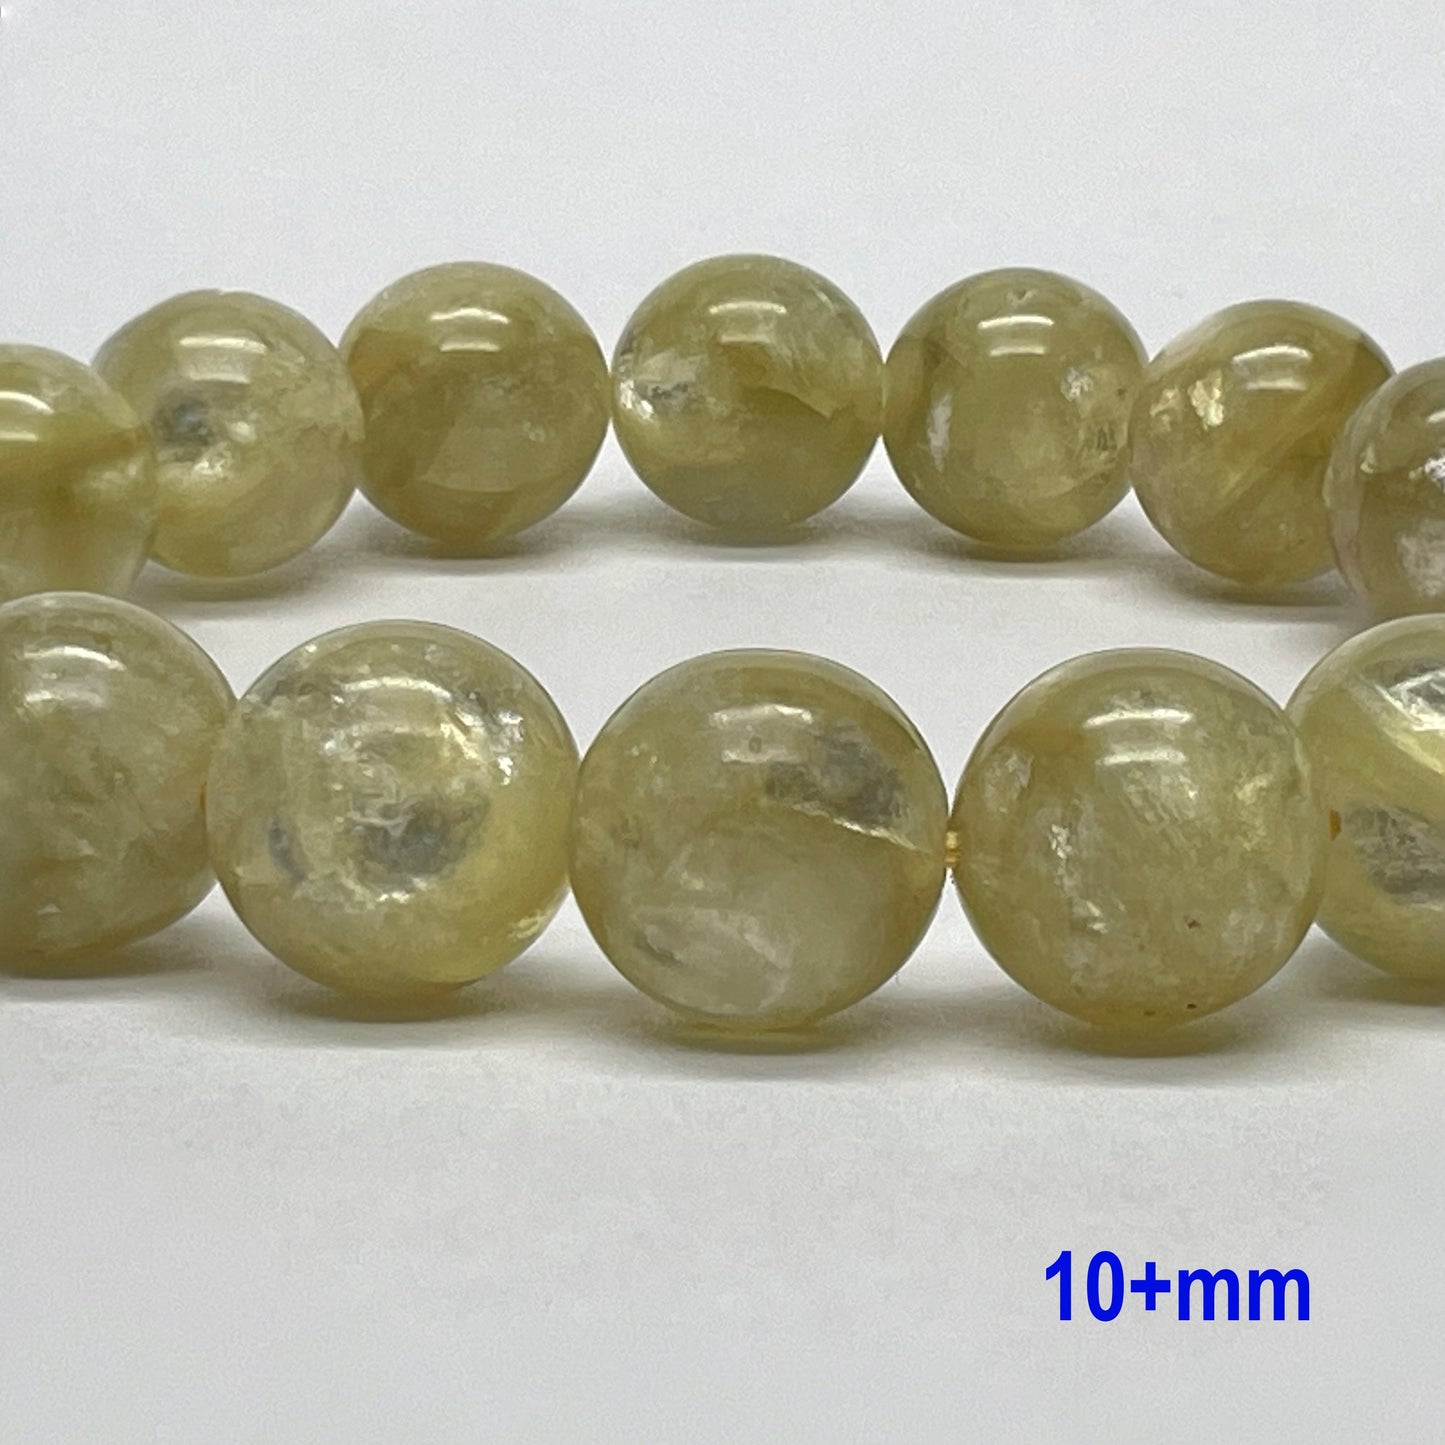 Stonelry Natural Golden Mica Beaded Bracelet (10 to 16+mm)